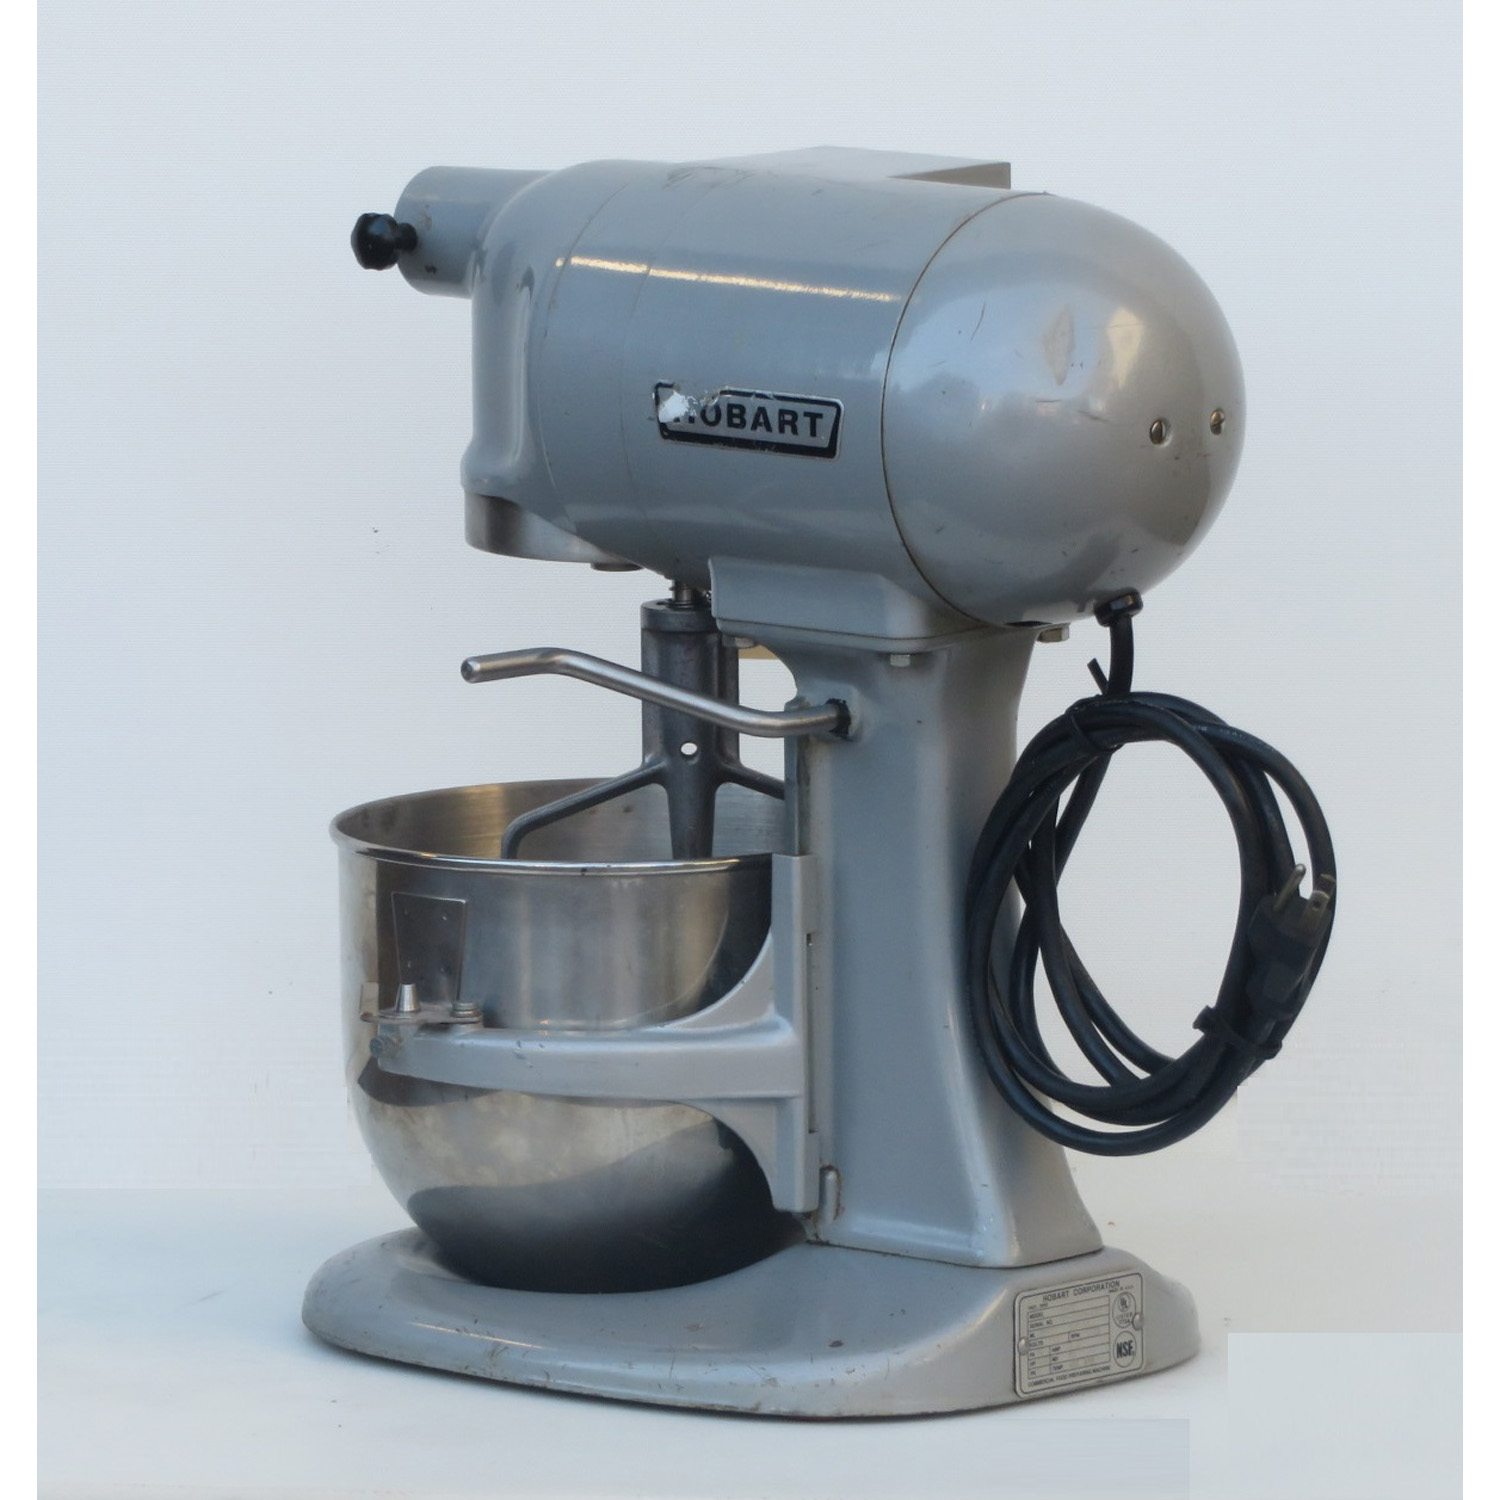 Hobart 5 Quart N50 Mixer, Used Great Condition image 2